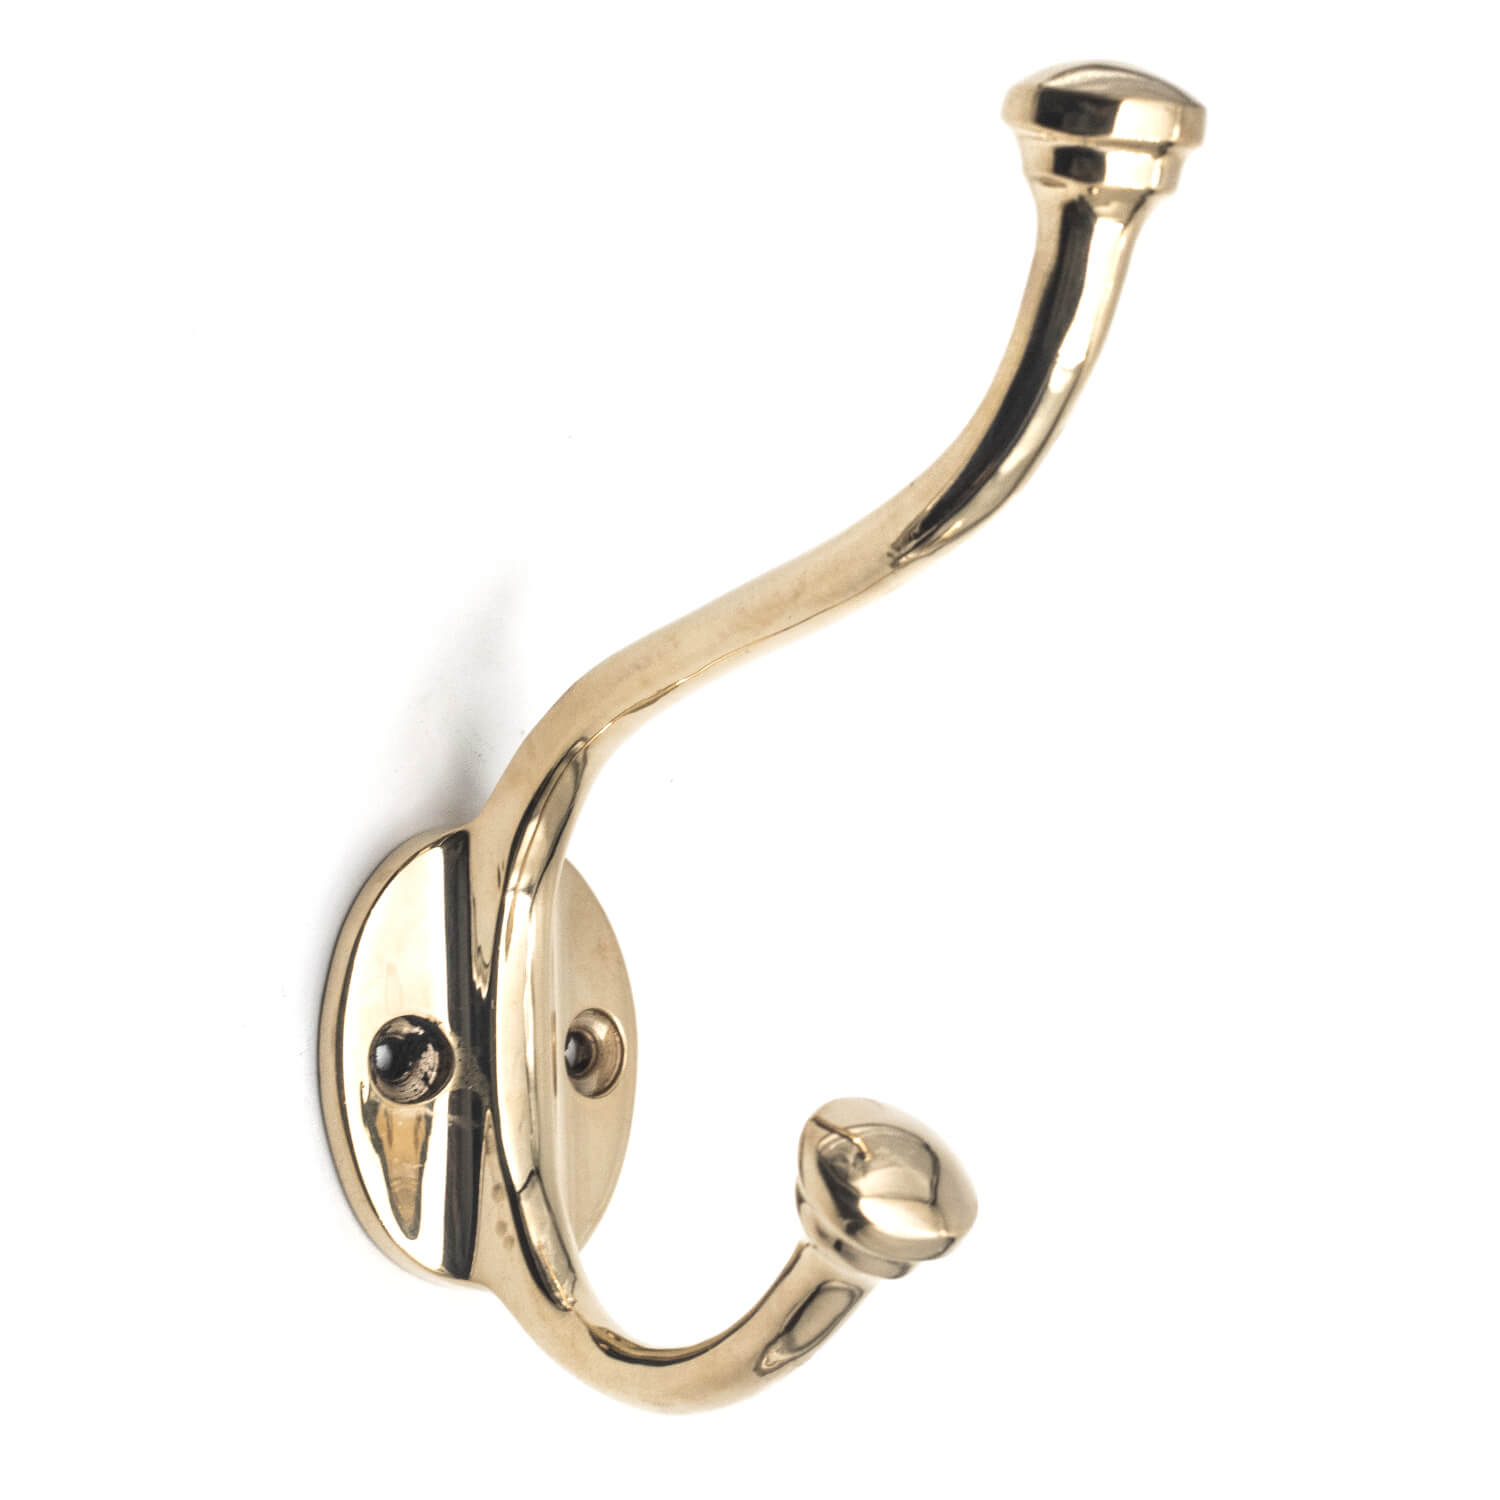 Hat hook - Classic - Brass without lacquer - Model 851 - Hooks